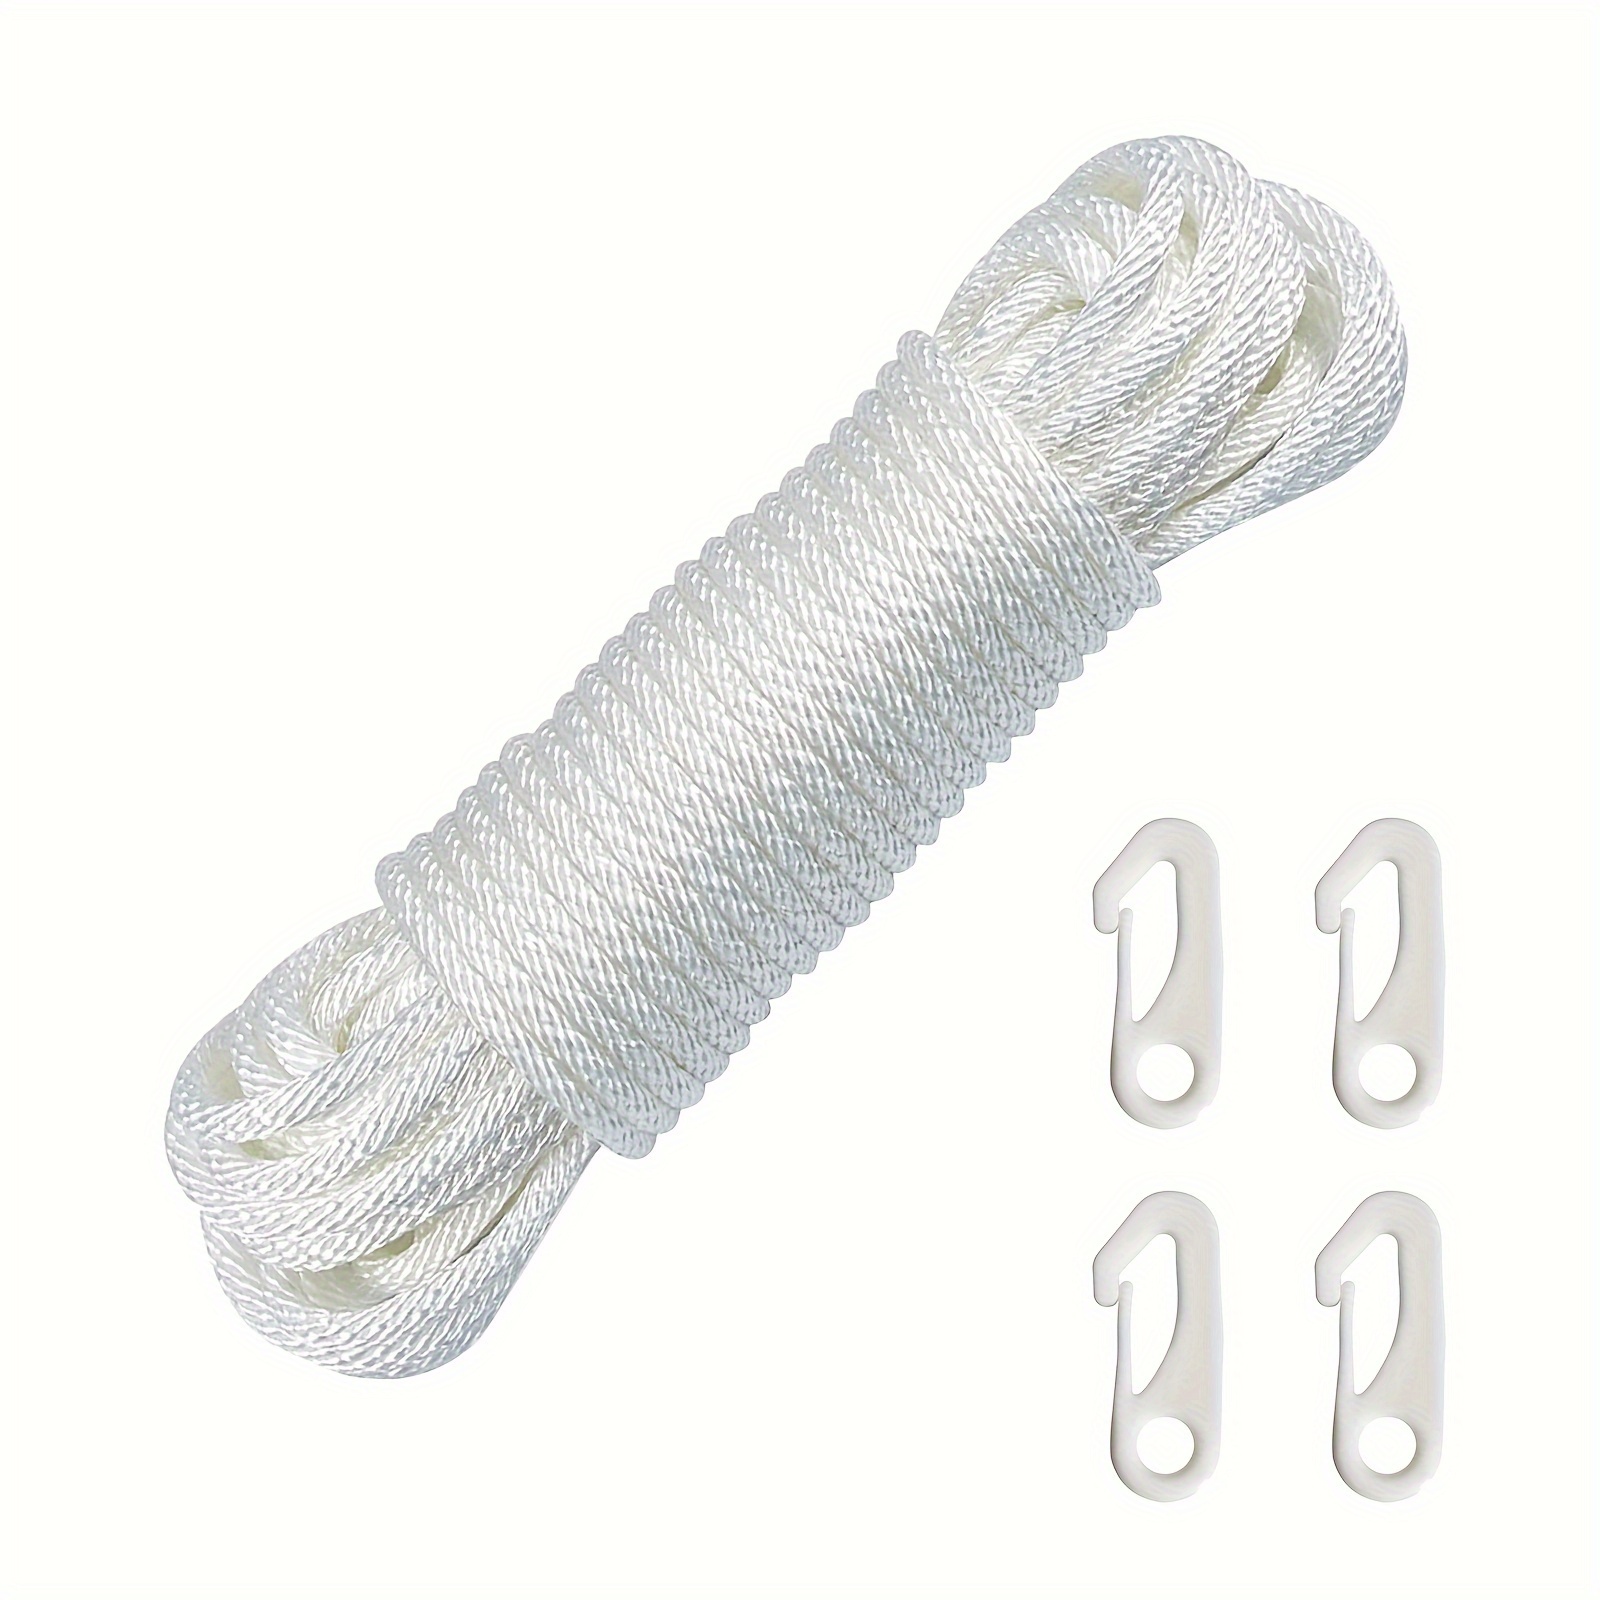 Flag Pole Rope Flagpole Halyard Rope White Braided Nylon Rope 6mm 20m Clothes Drying Cotton Rope Replacement Cord String, Size: 2000.00X0.60X0.60CM